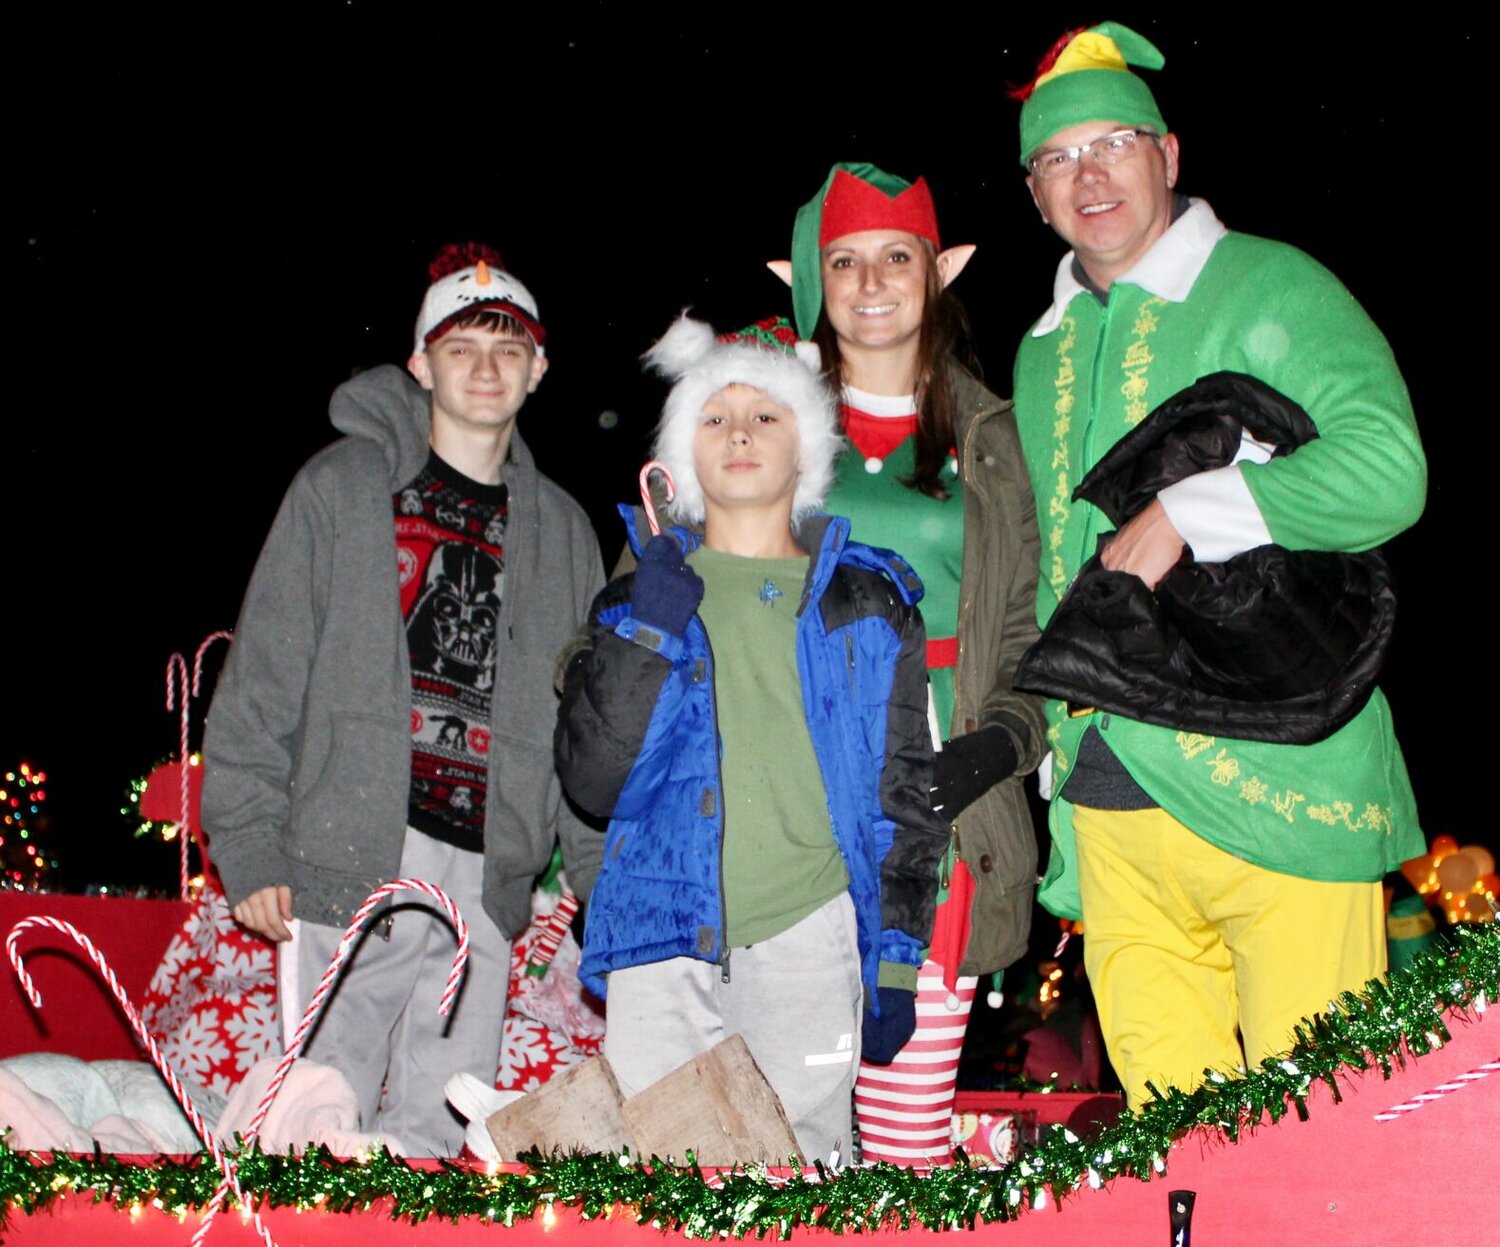 Buddy the Elf and friends were represented on this Willow Springs Chamber of Commerce float, making spirits bright despite cold drizzle that started at the beginning of the parade. The parade, themed "Christmas at the Movies," was held Saturday evening as the finale of a day's worth of Christmas activities in downtown Willow Springs. From left are Jace Rogers, Paxton Tooley, Brittney Collins and Robert Hollis.